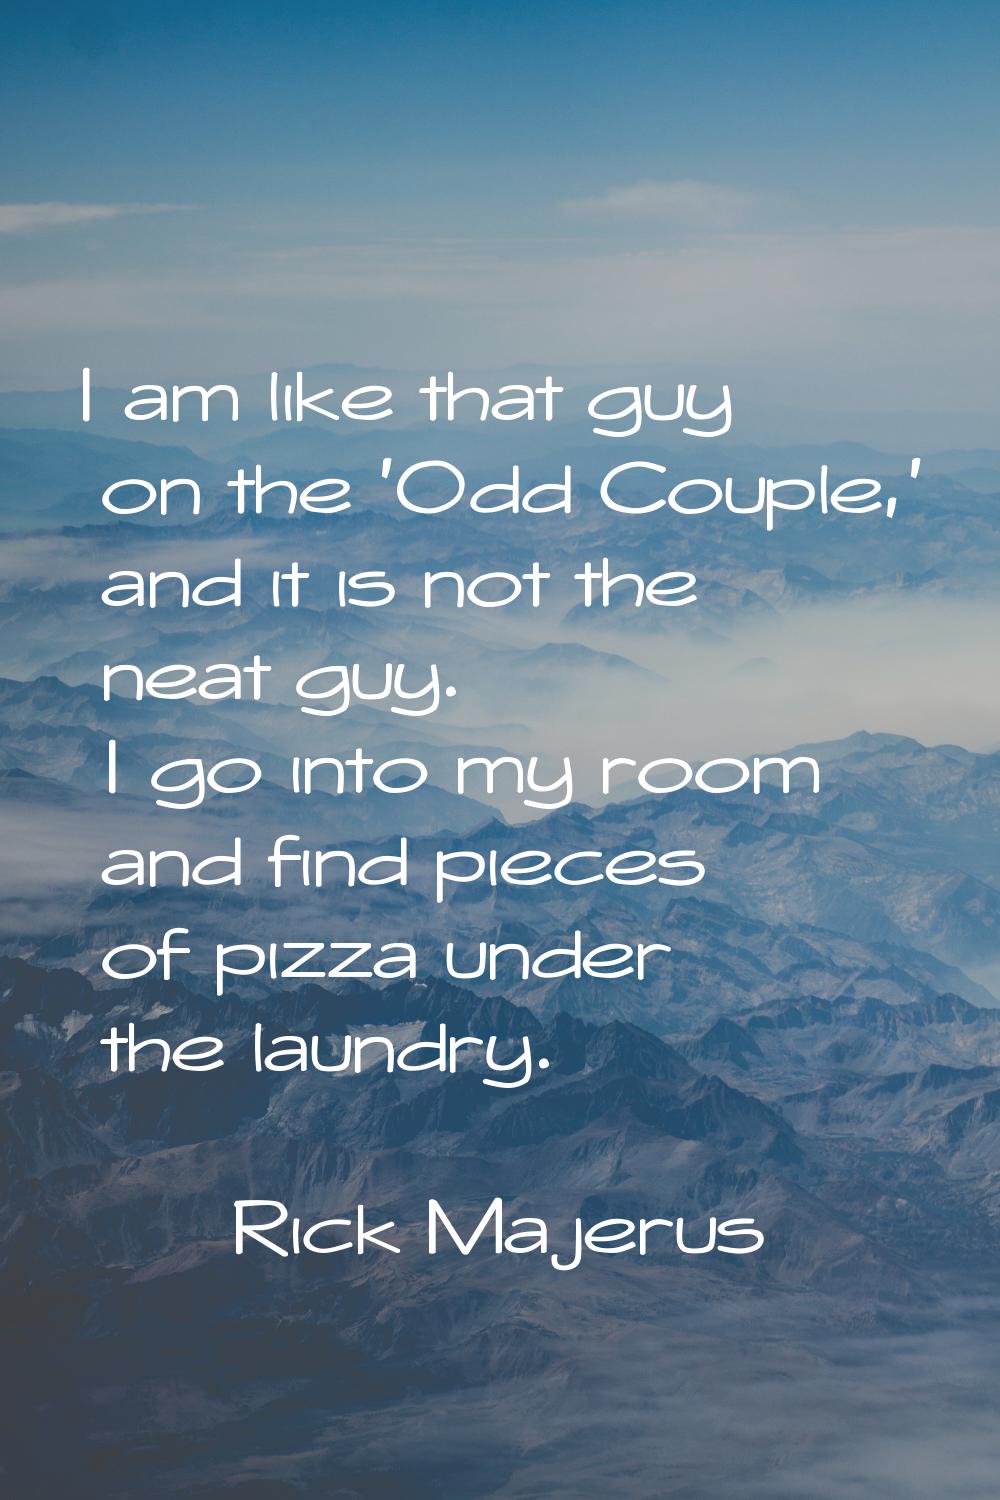 I am like that guy on the 'Odd Couple,' and it is not the neat guy. I go into my room and find piec